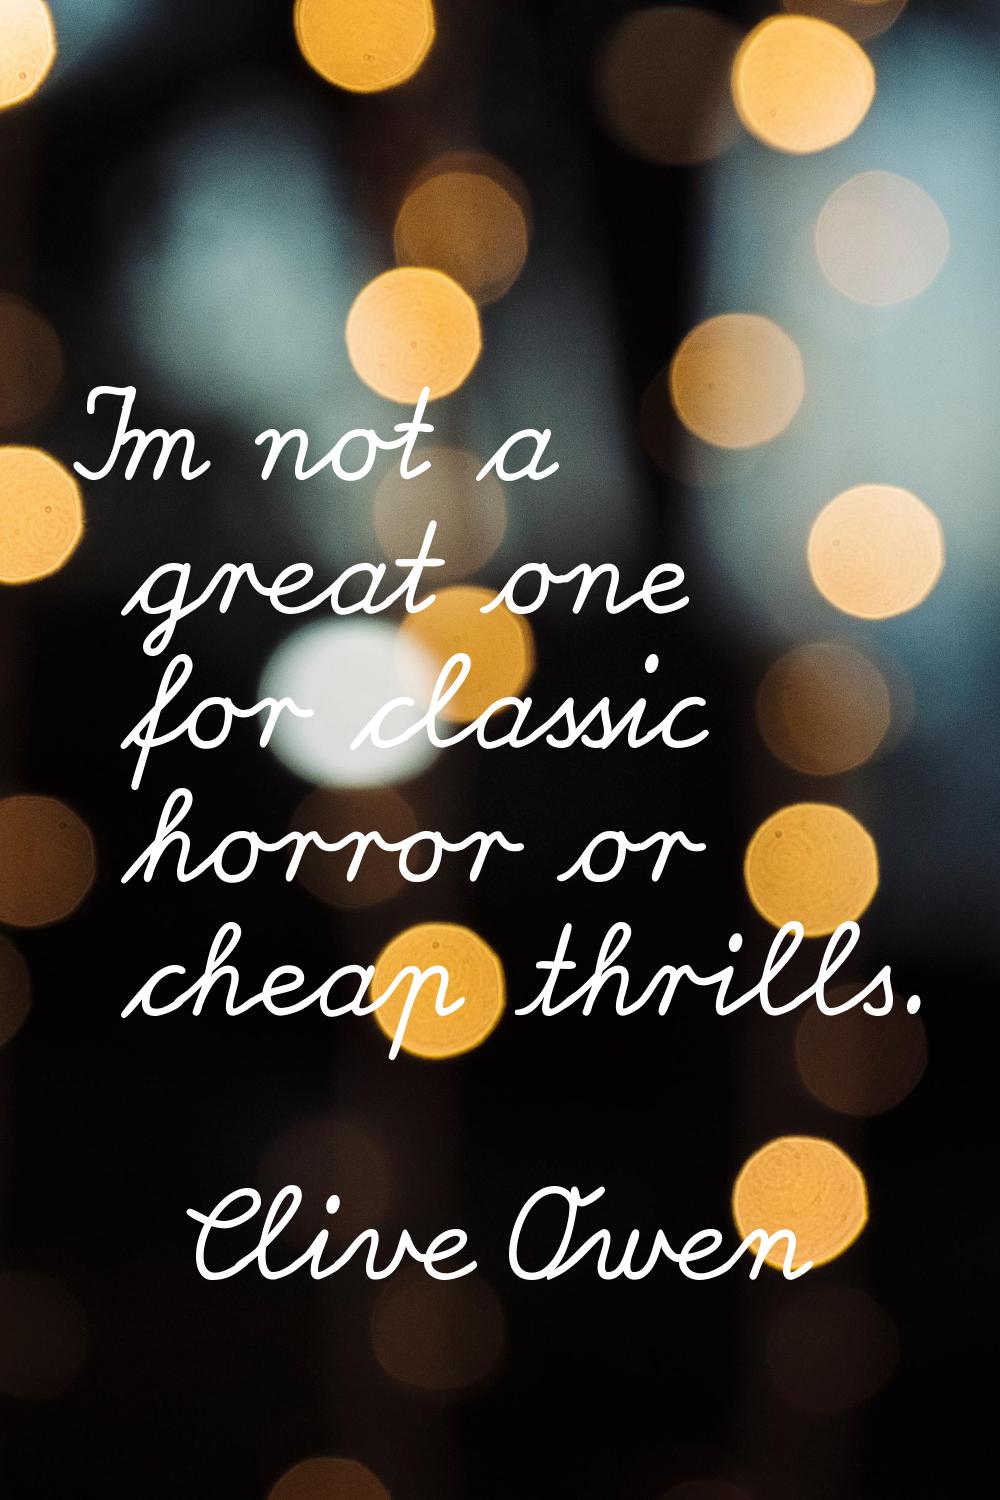 I'm not a great one for classic horror or cheap thrills.